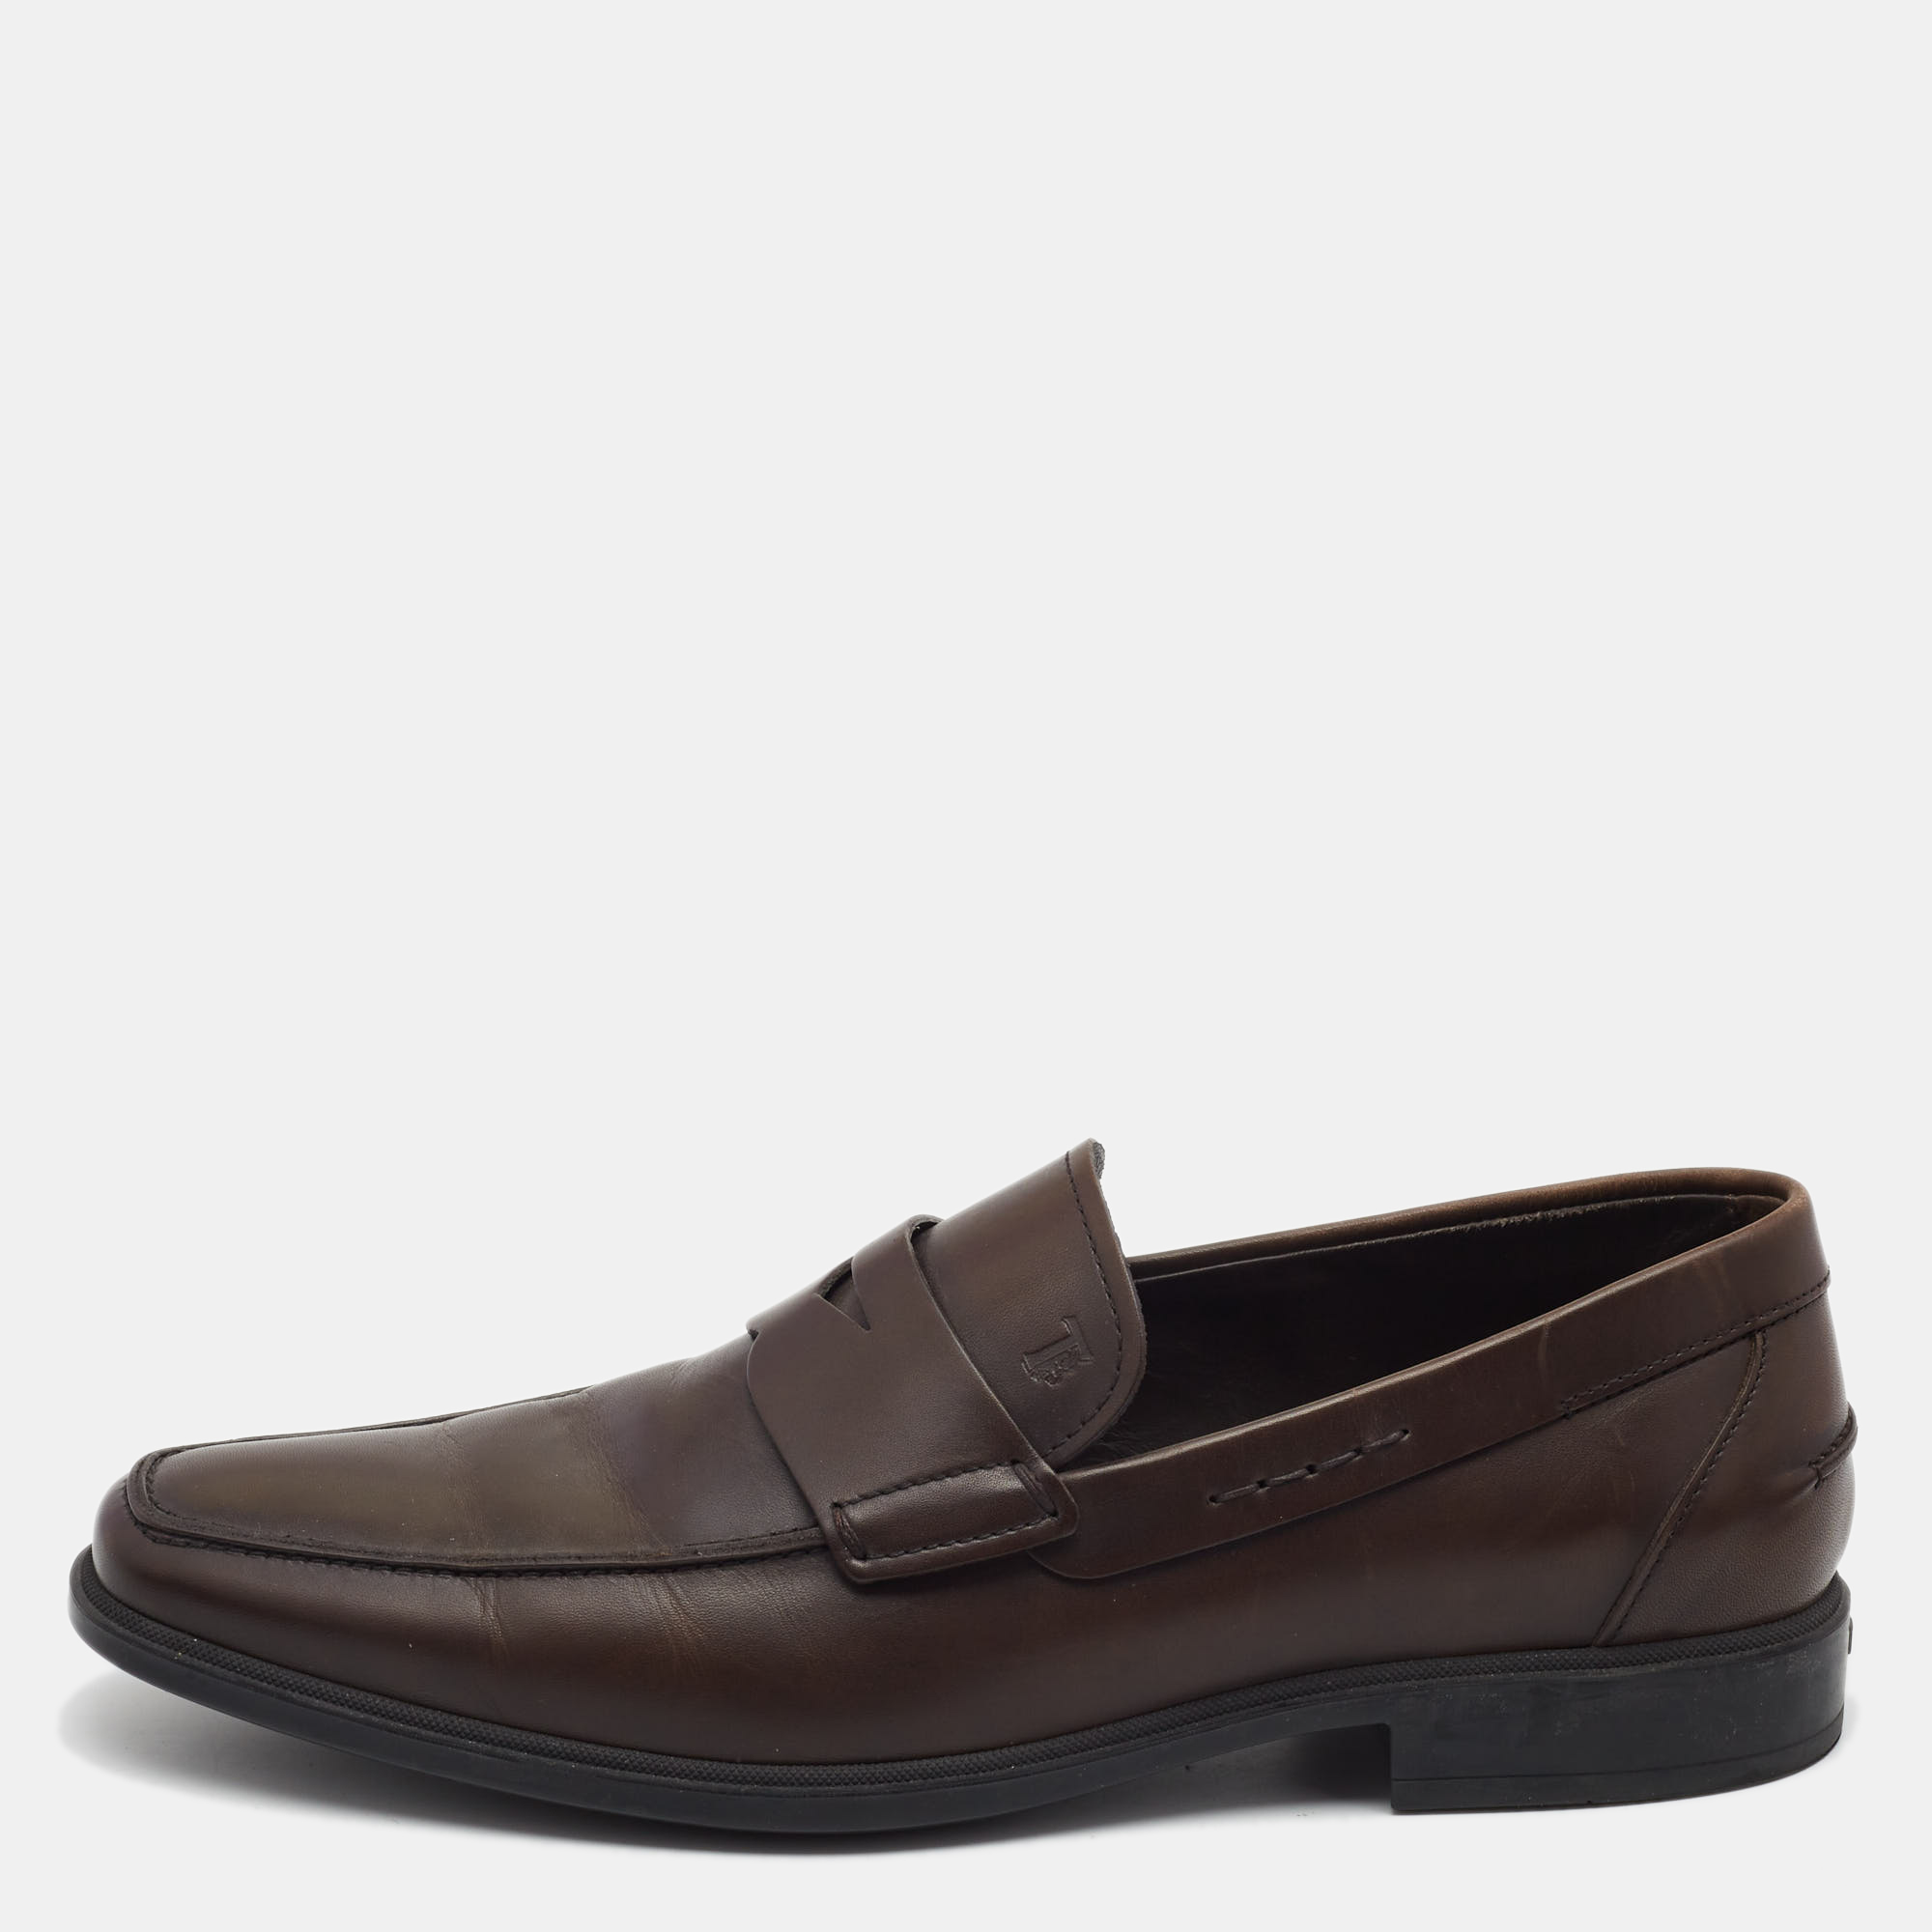 

Tods Brown Leather Slip On Loafers Size